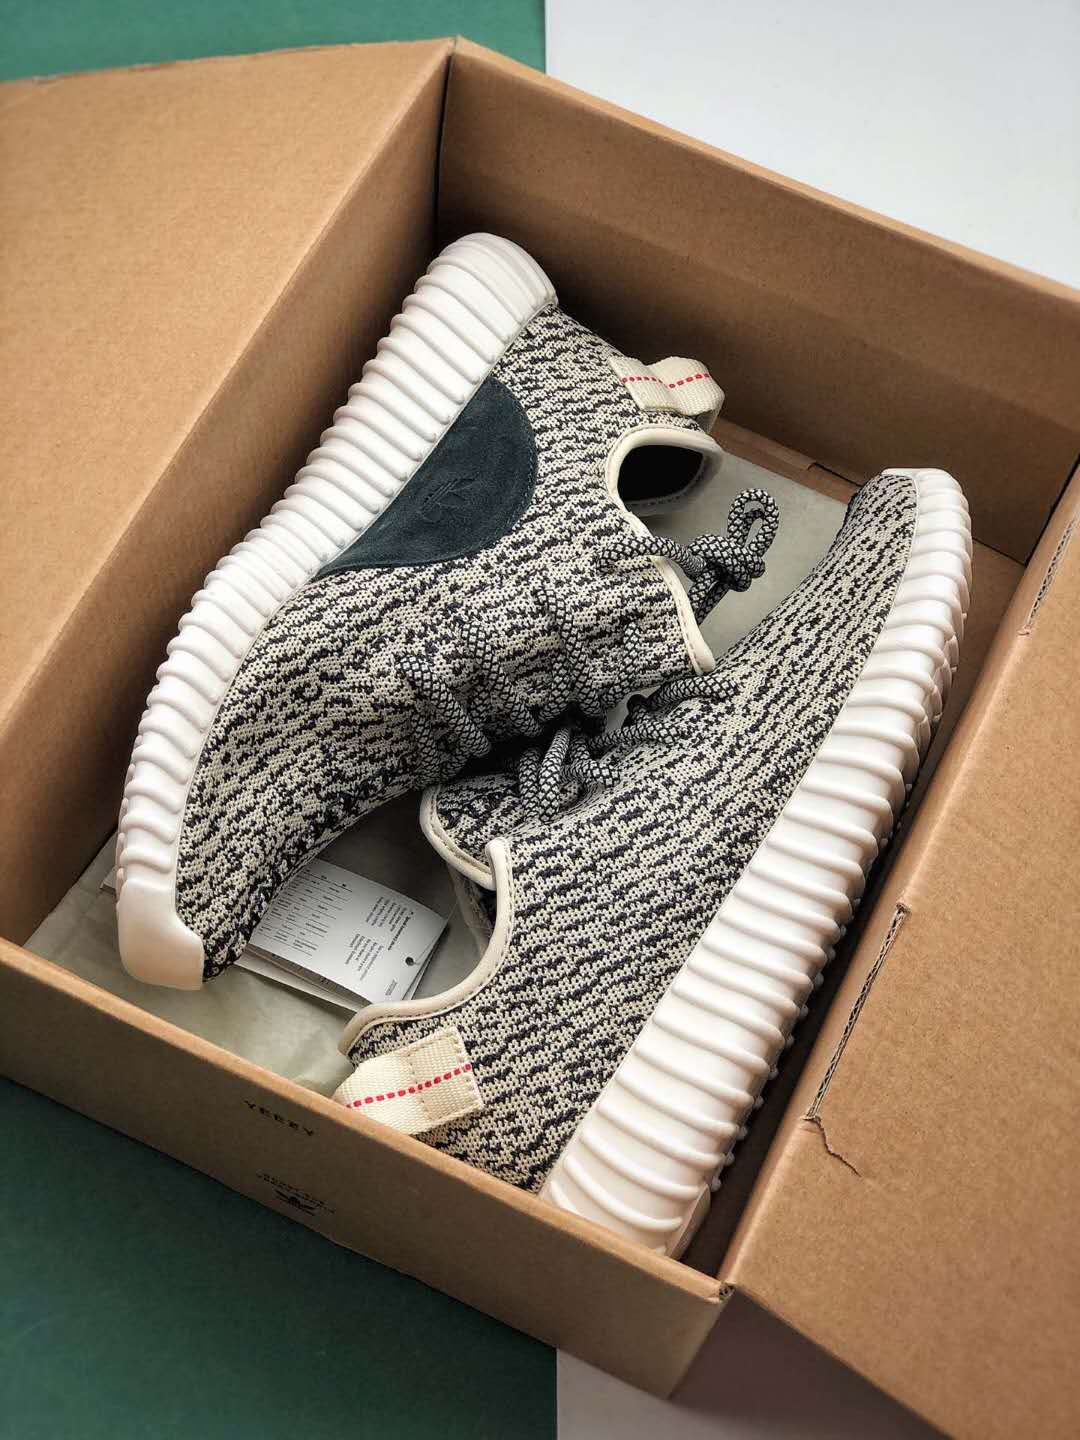 Adidas Yeezy Boost 350 Turtledove AQ4832 - Authentic Sneakers for Sale